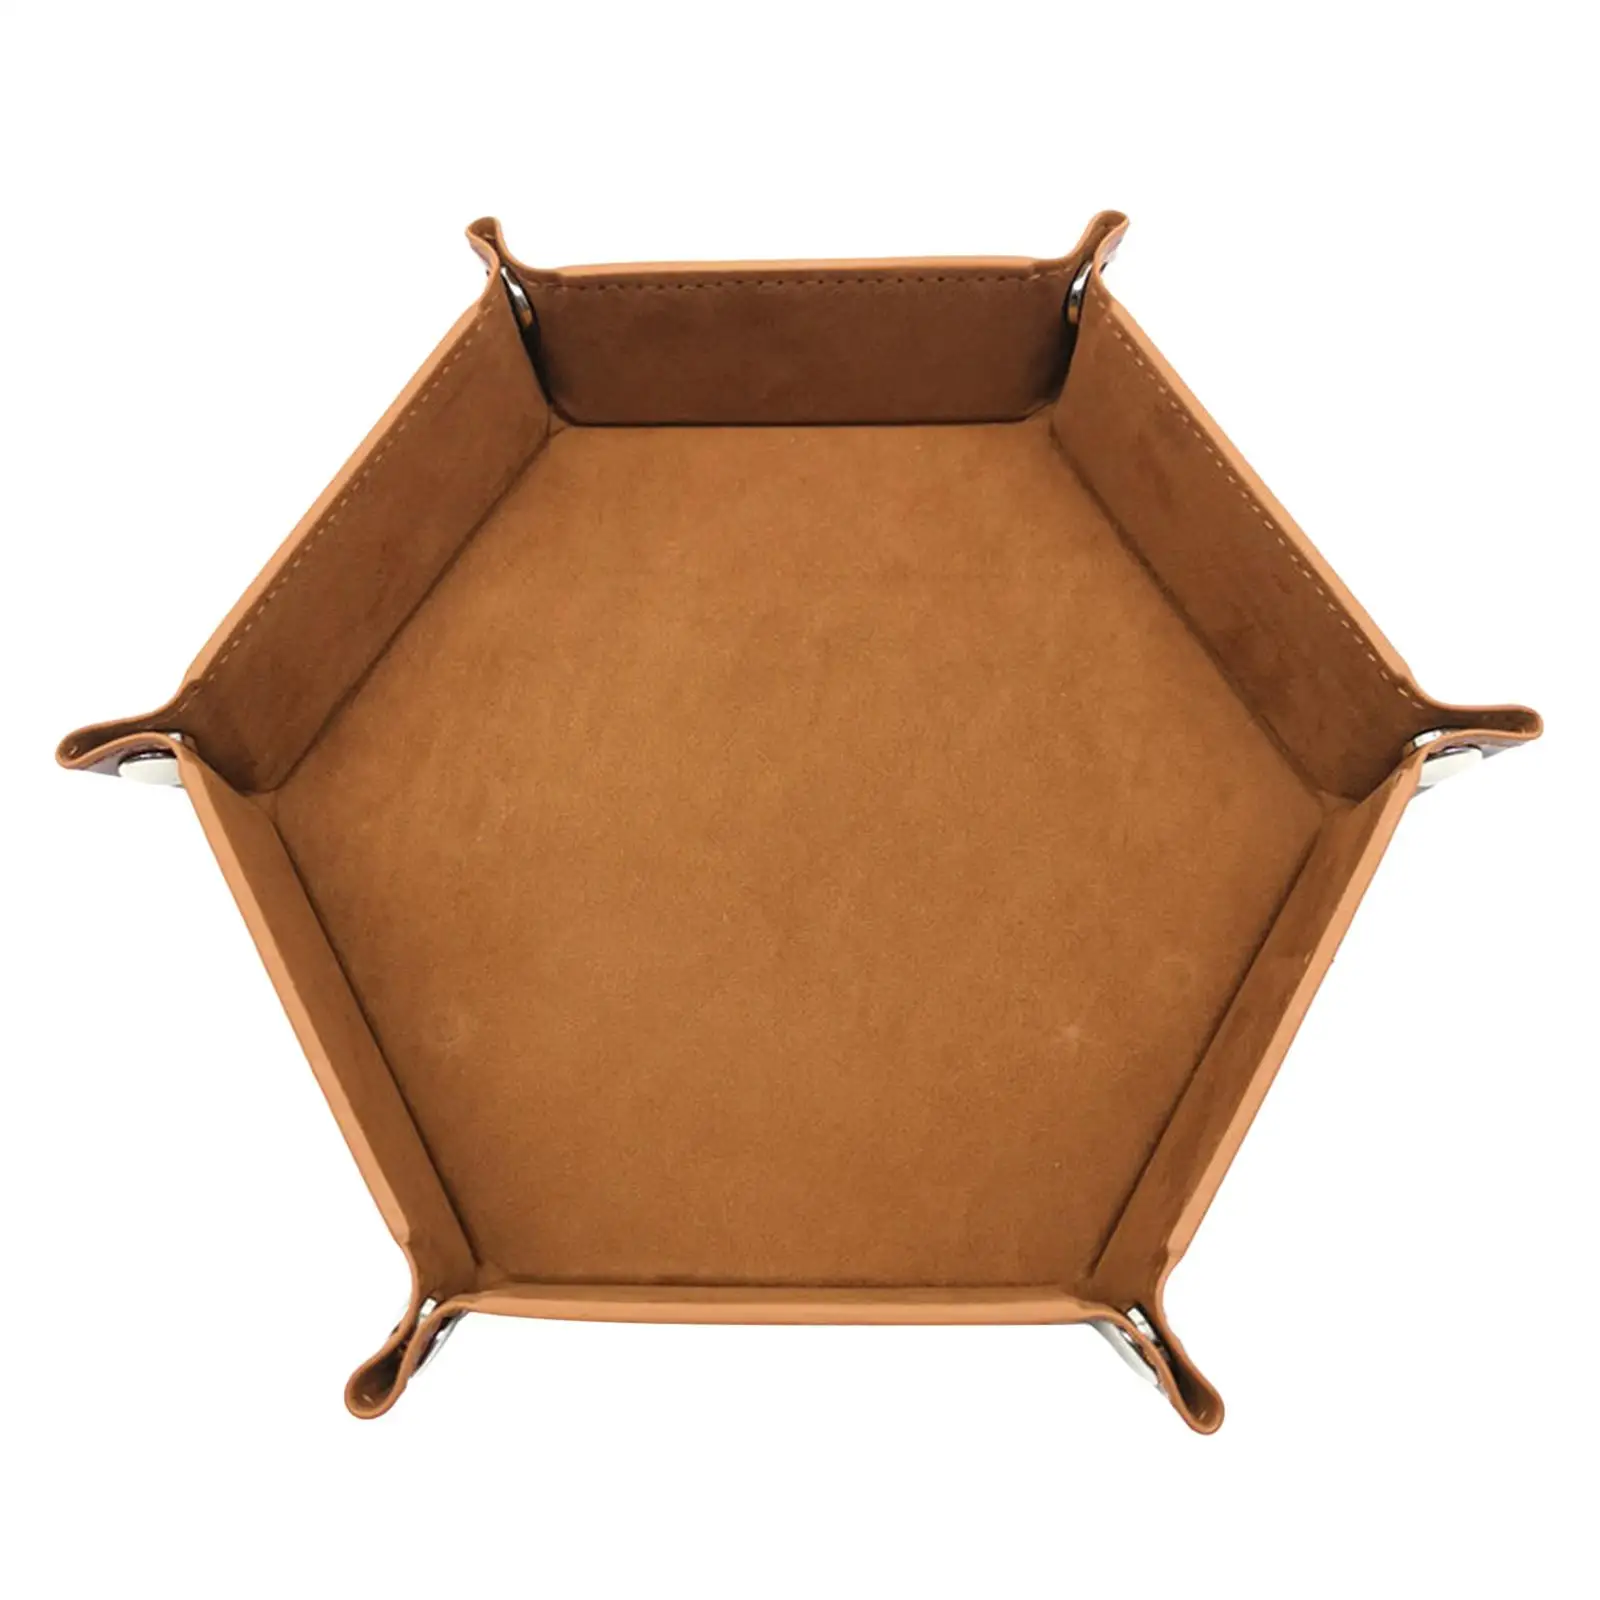 Folding Dice Tray Hexagonal Turntable Rolling Tray Storage Holder Dices Game Bar Party Supplies for Role Playing Game Accessory